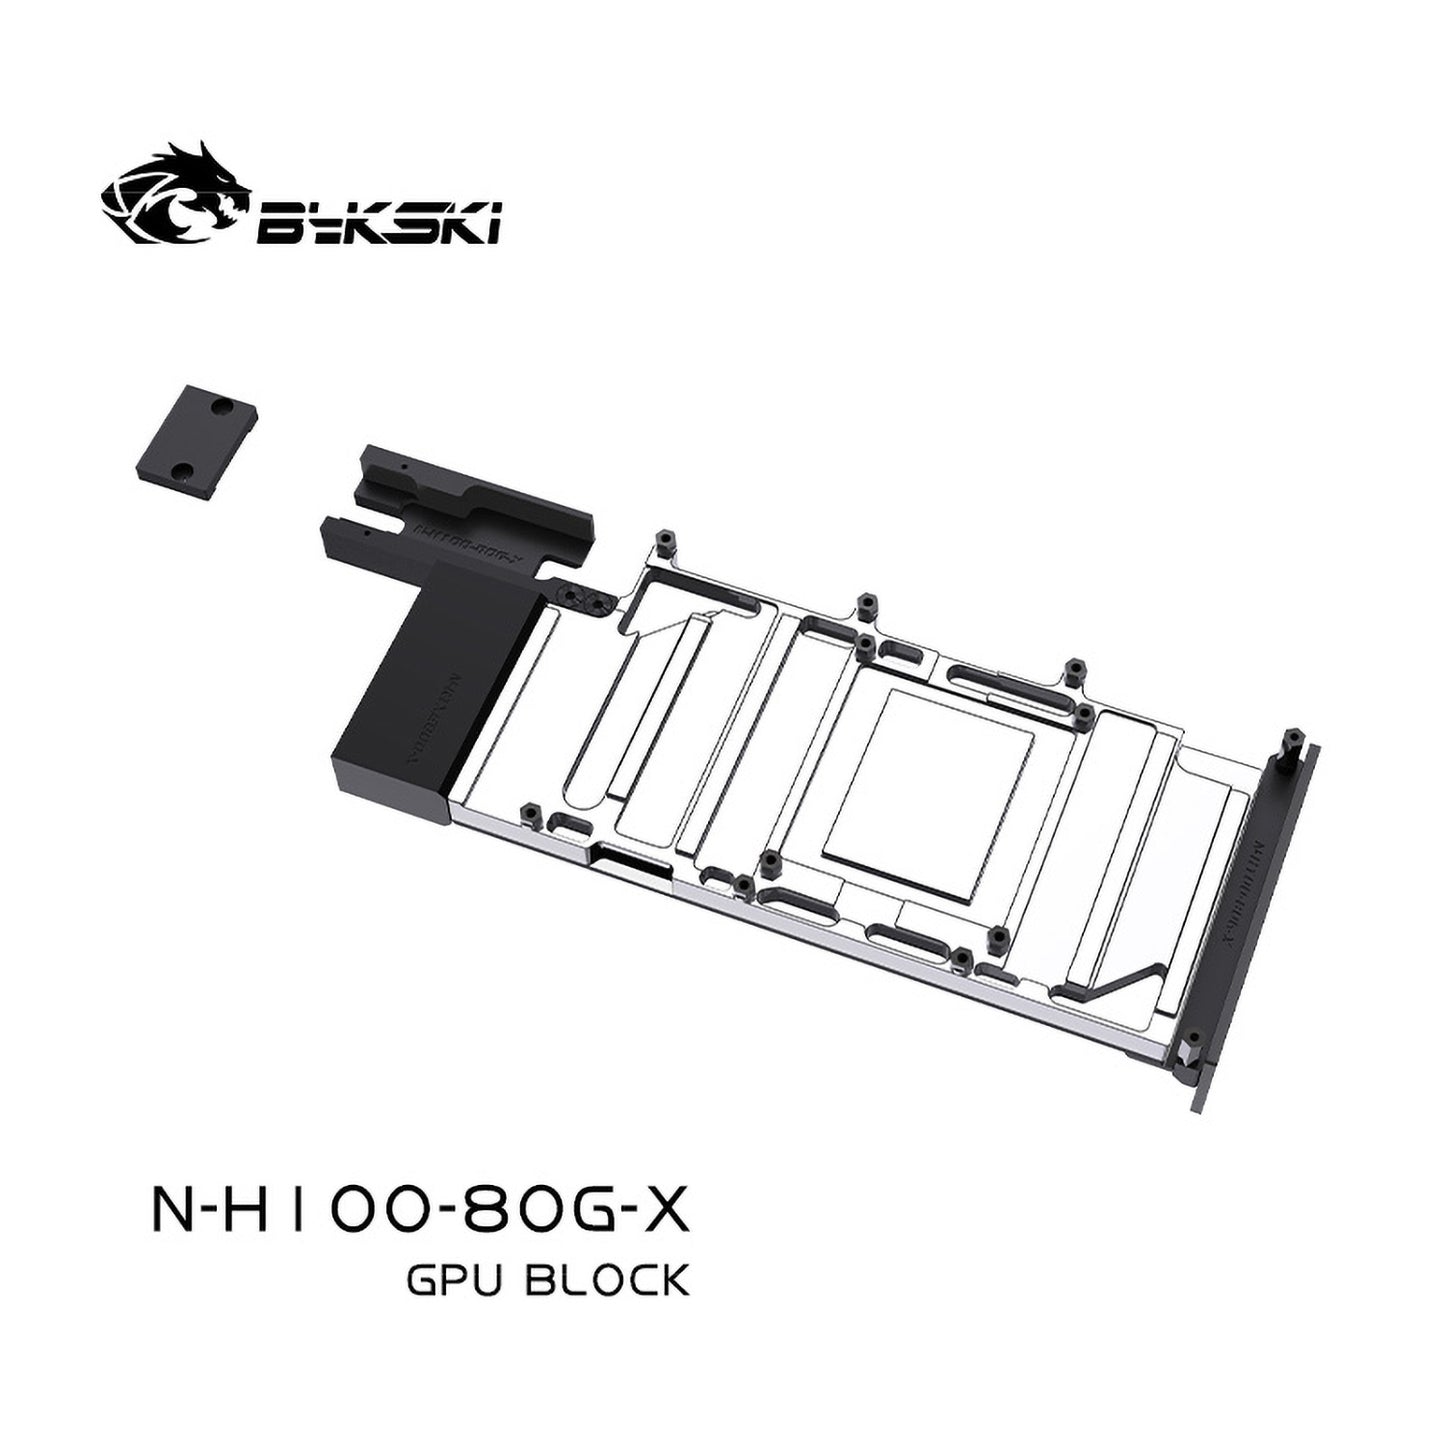 Bykski GPU Block For Nvidia H100 80G / H800 80G, High Heat Resistance Material POM + Full Metal Construction, With Backplate Full Cover GPU Water Cooling Cooler Radiator Block, N-H100-80G-X